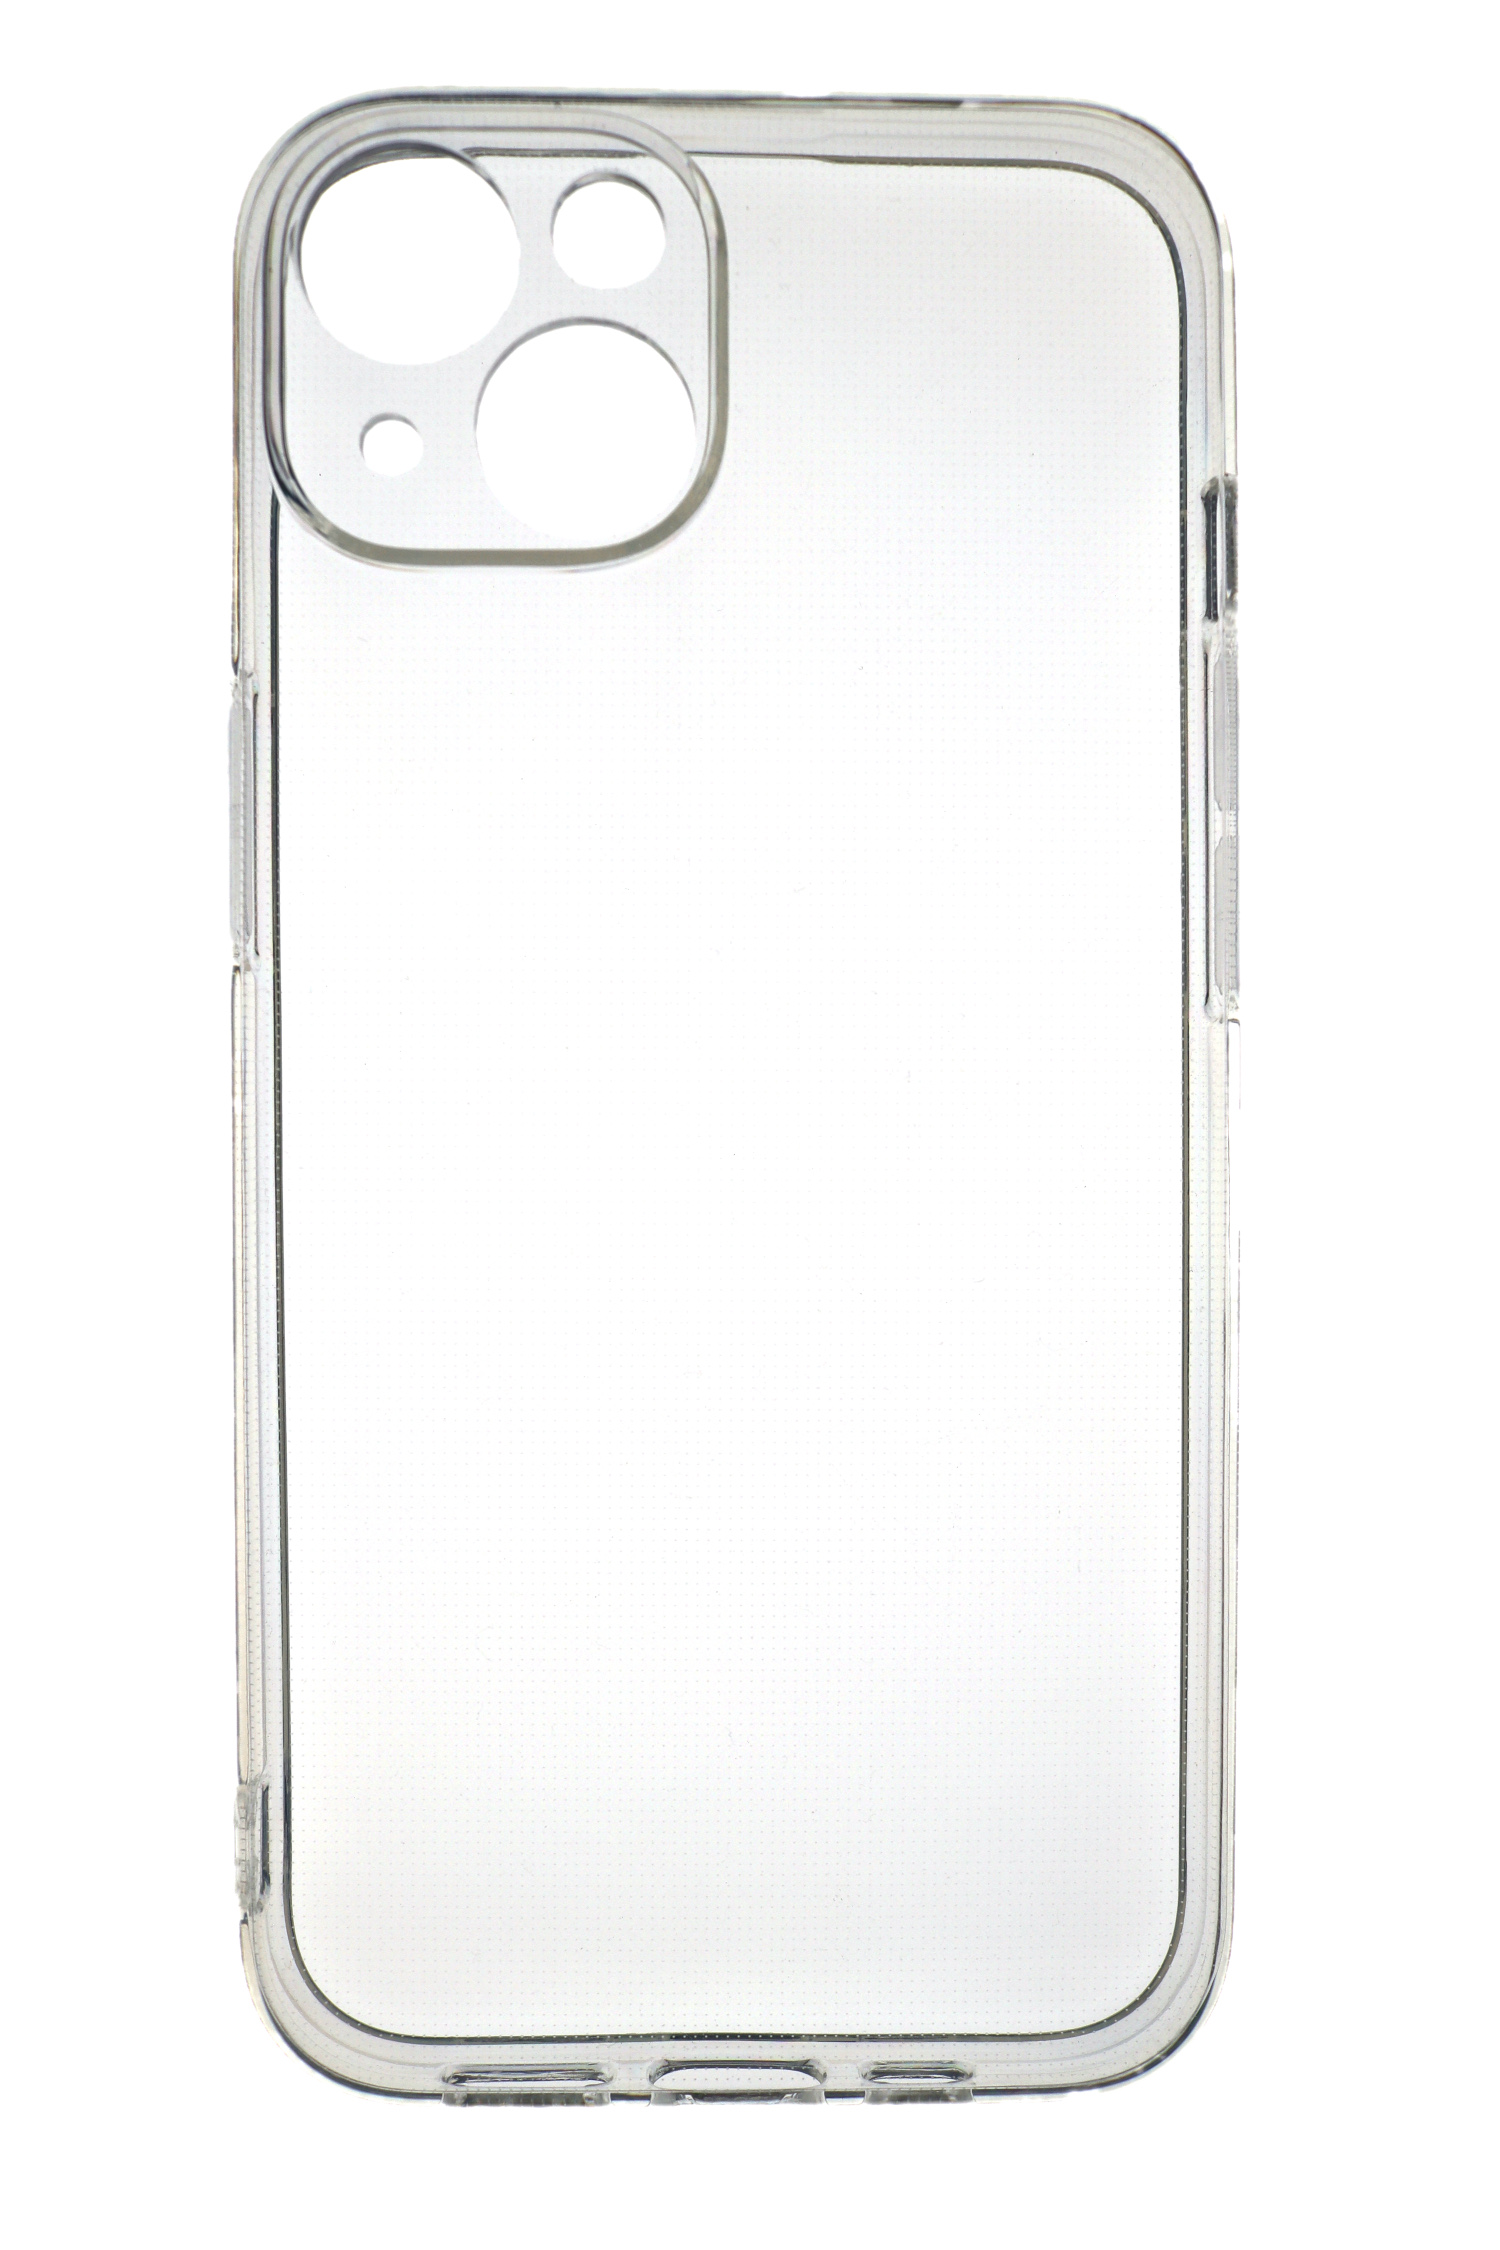 JAMCOVER Transparent Backcover, 14, Strong, mm Case Apple, 2.0 iPhone TPU